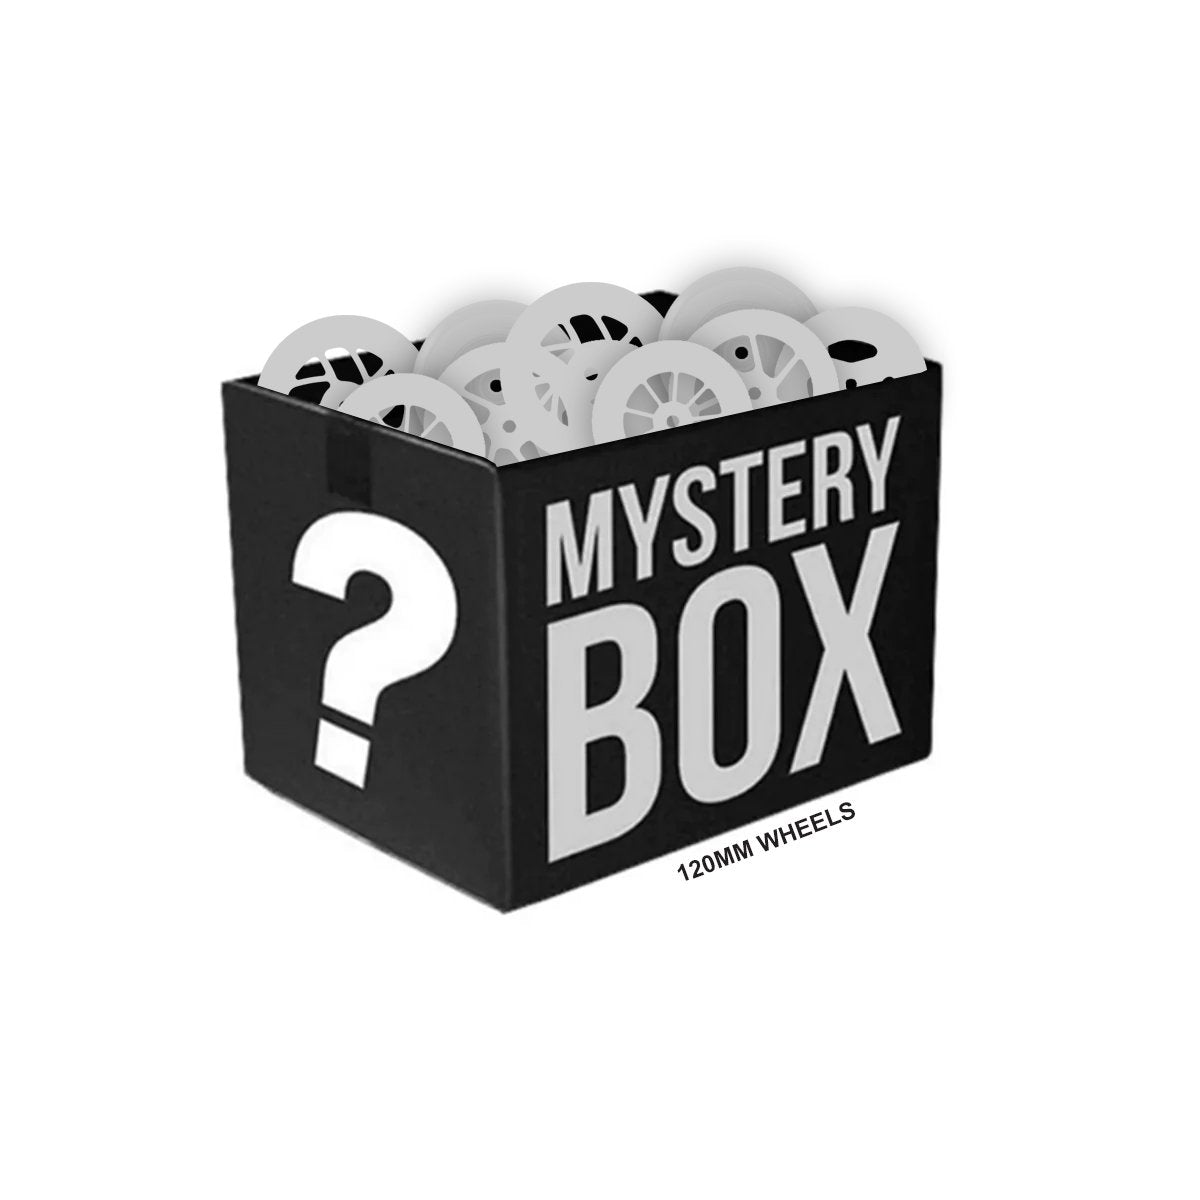 Mystery Box 120mm Wheels - Riding Scooters - Bland Pro Shop